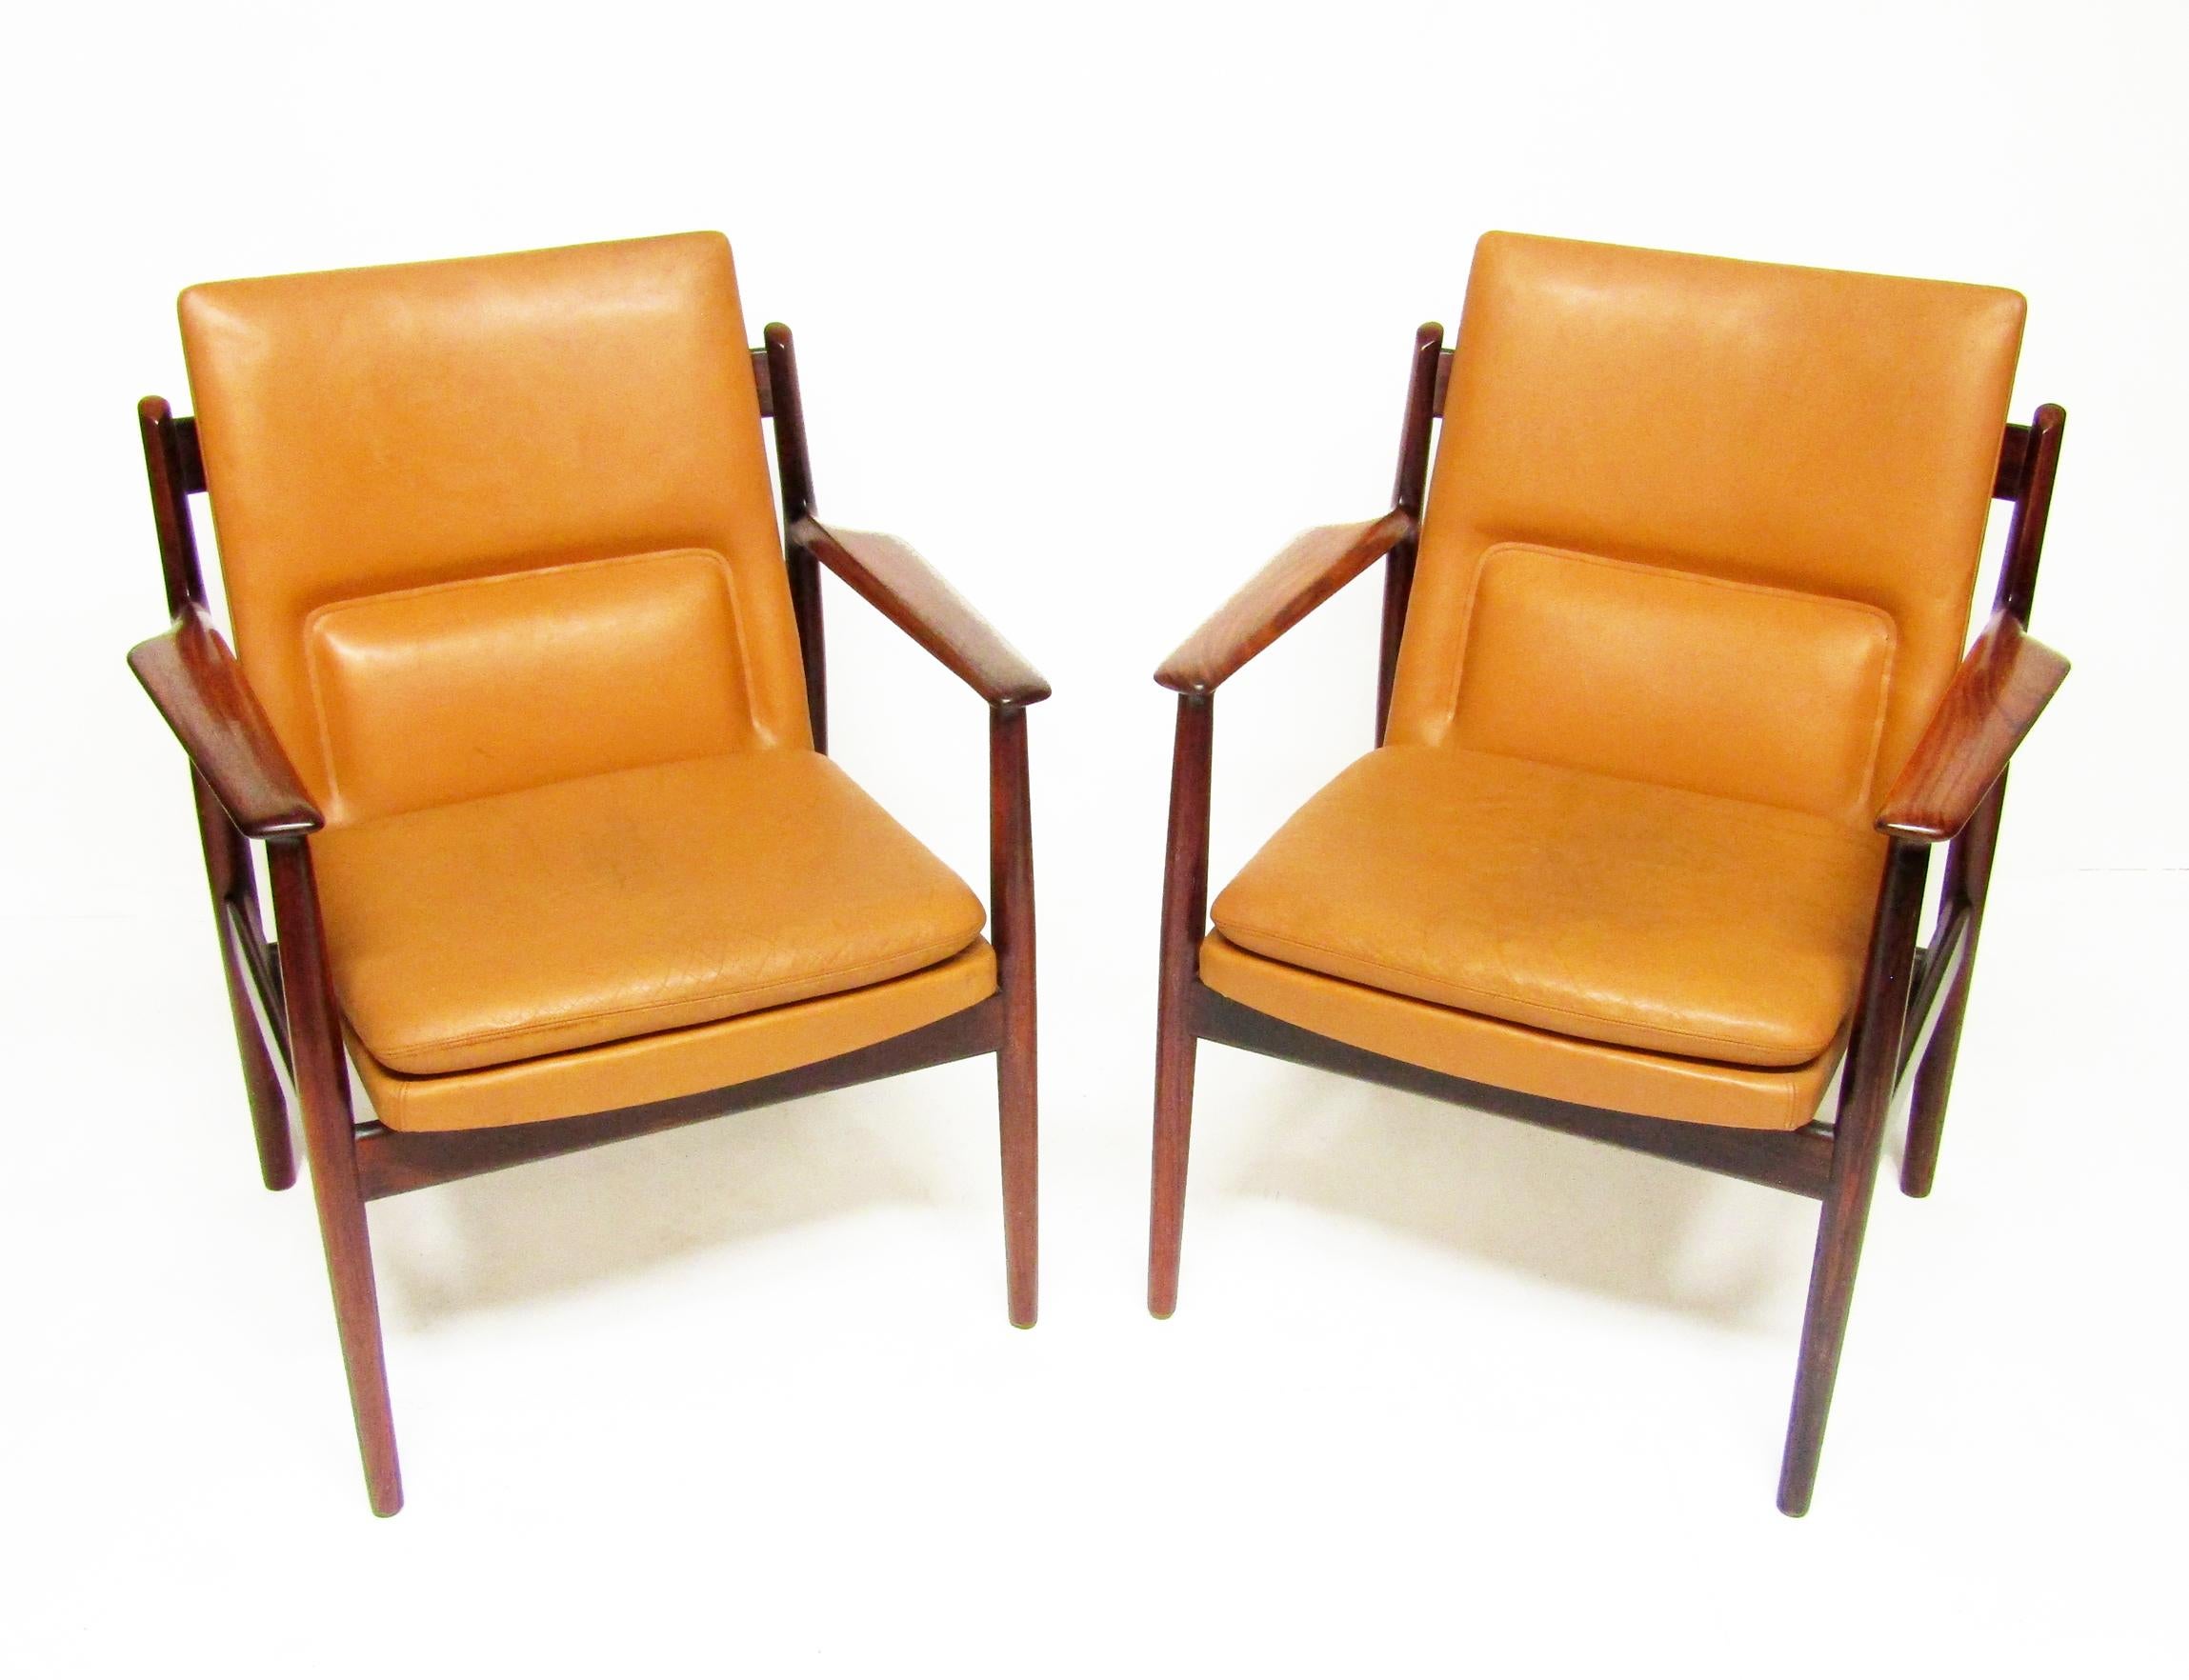 A pair of 1970s space-age 